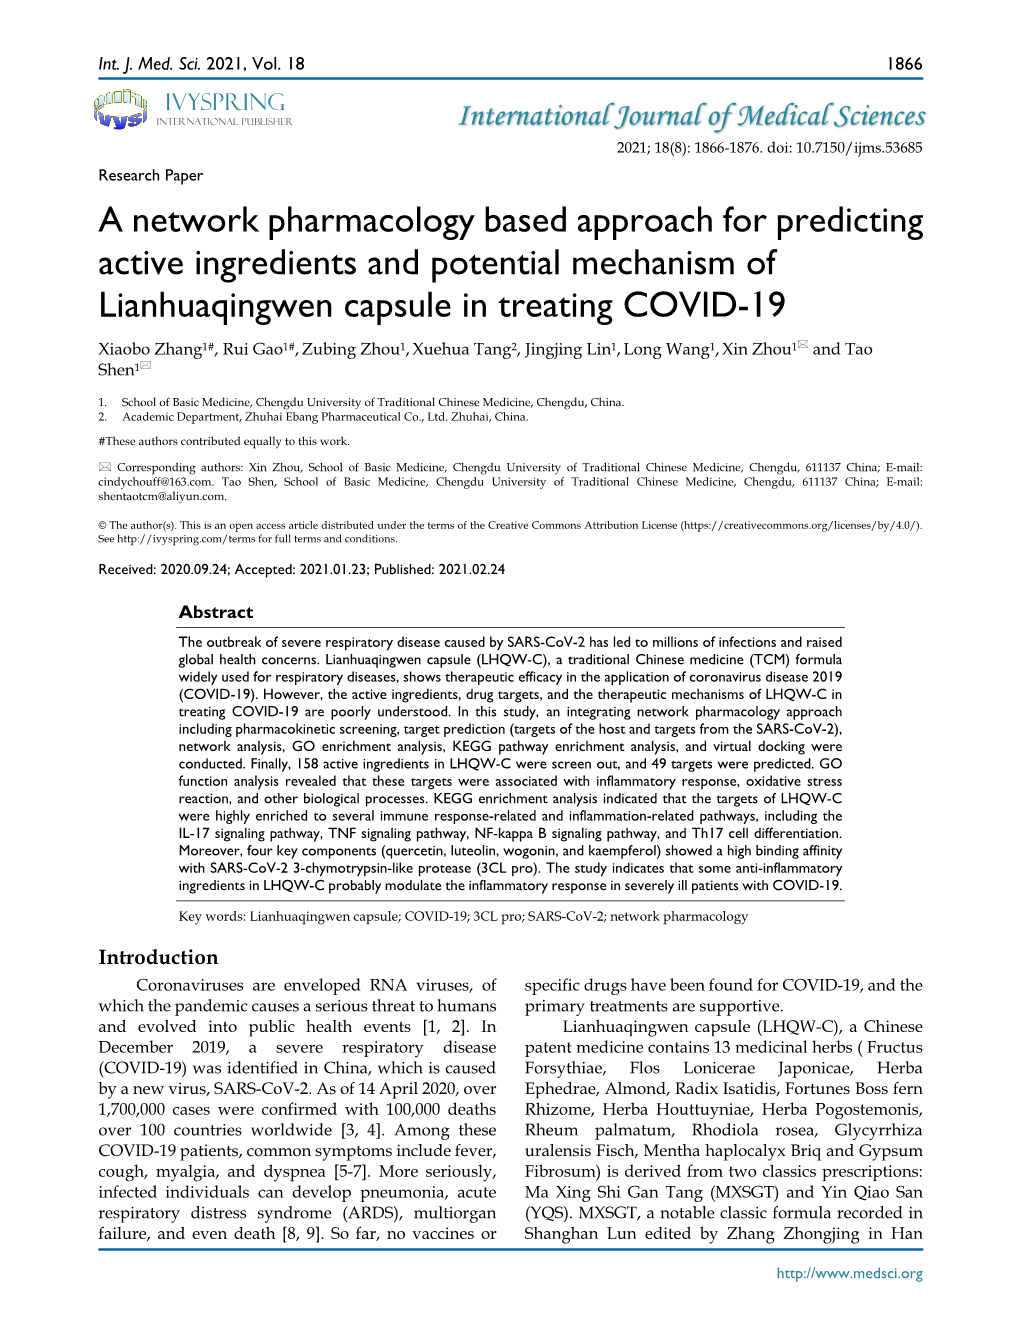 A Network Pharmacology Based Approach for Predicting Active Ingredients and Potential Mechanism of Lianhuaqingwen Capsule In